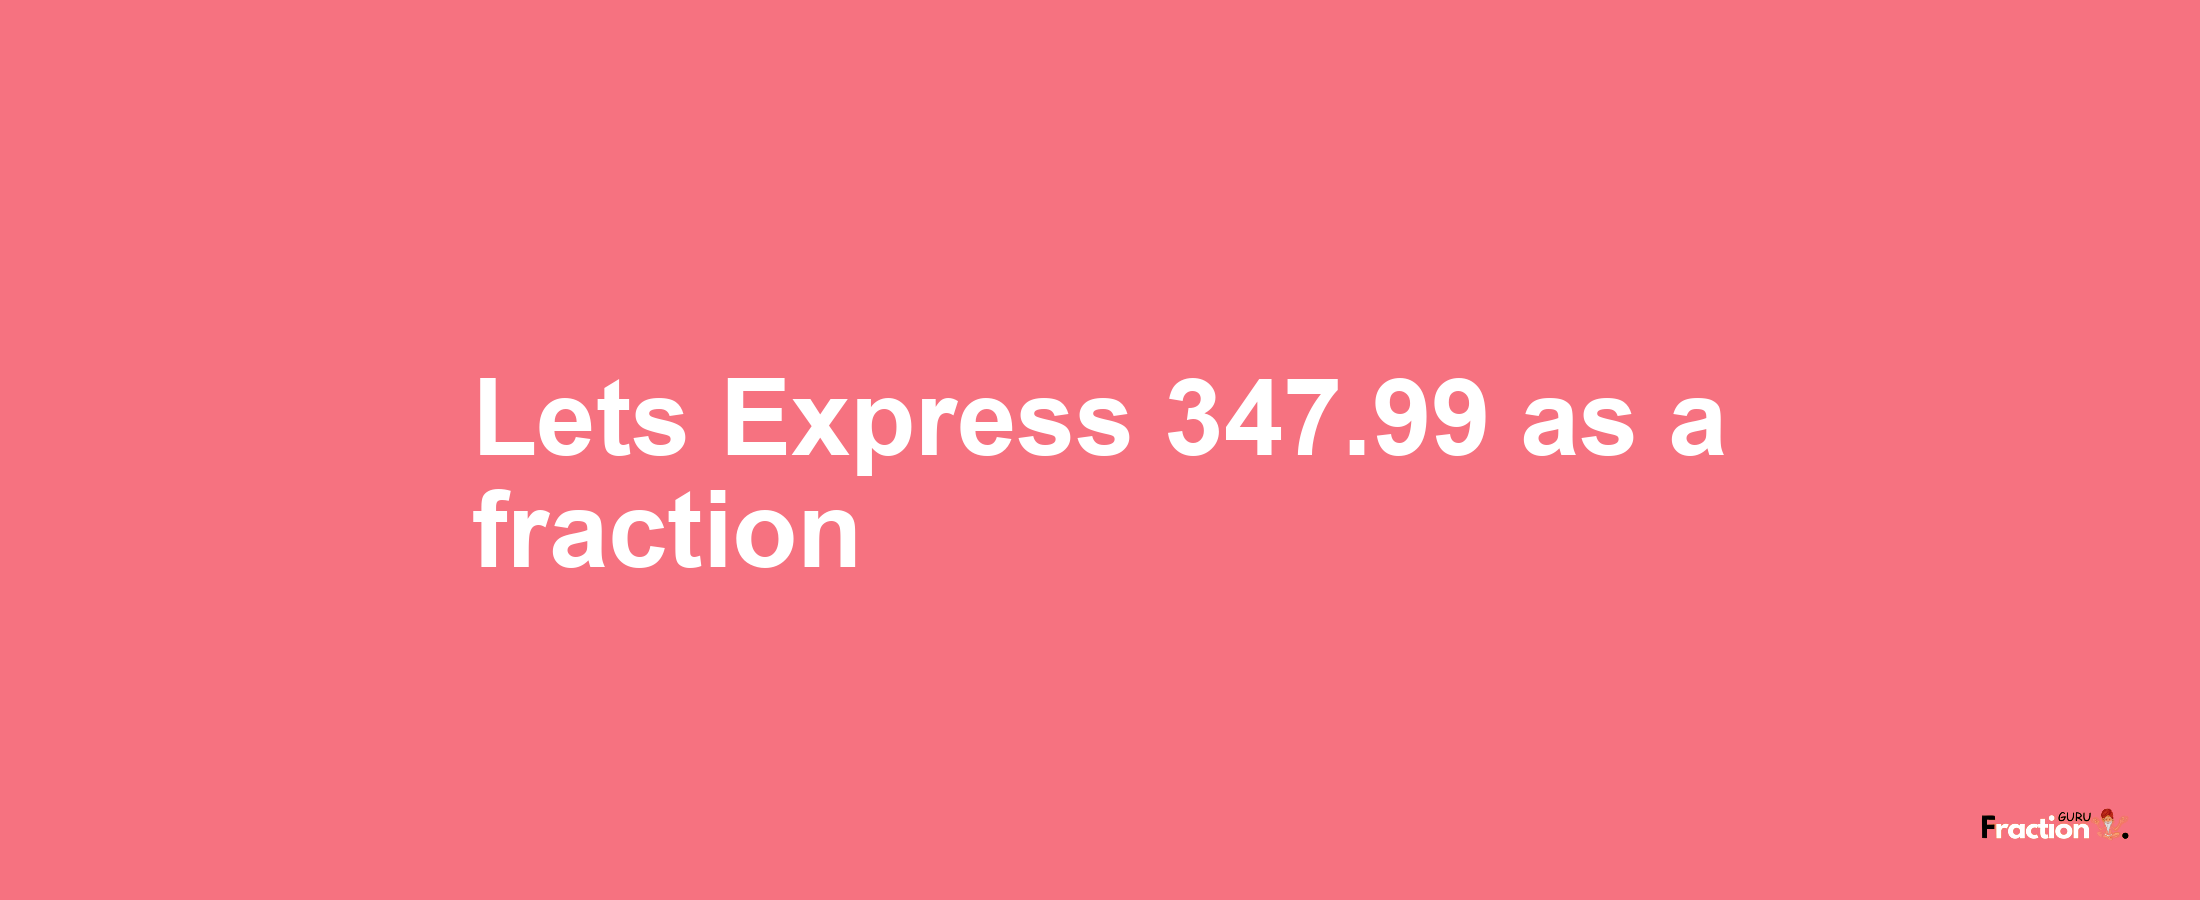 Lets Express 347.99 as afraction